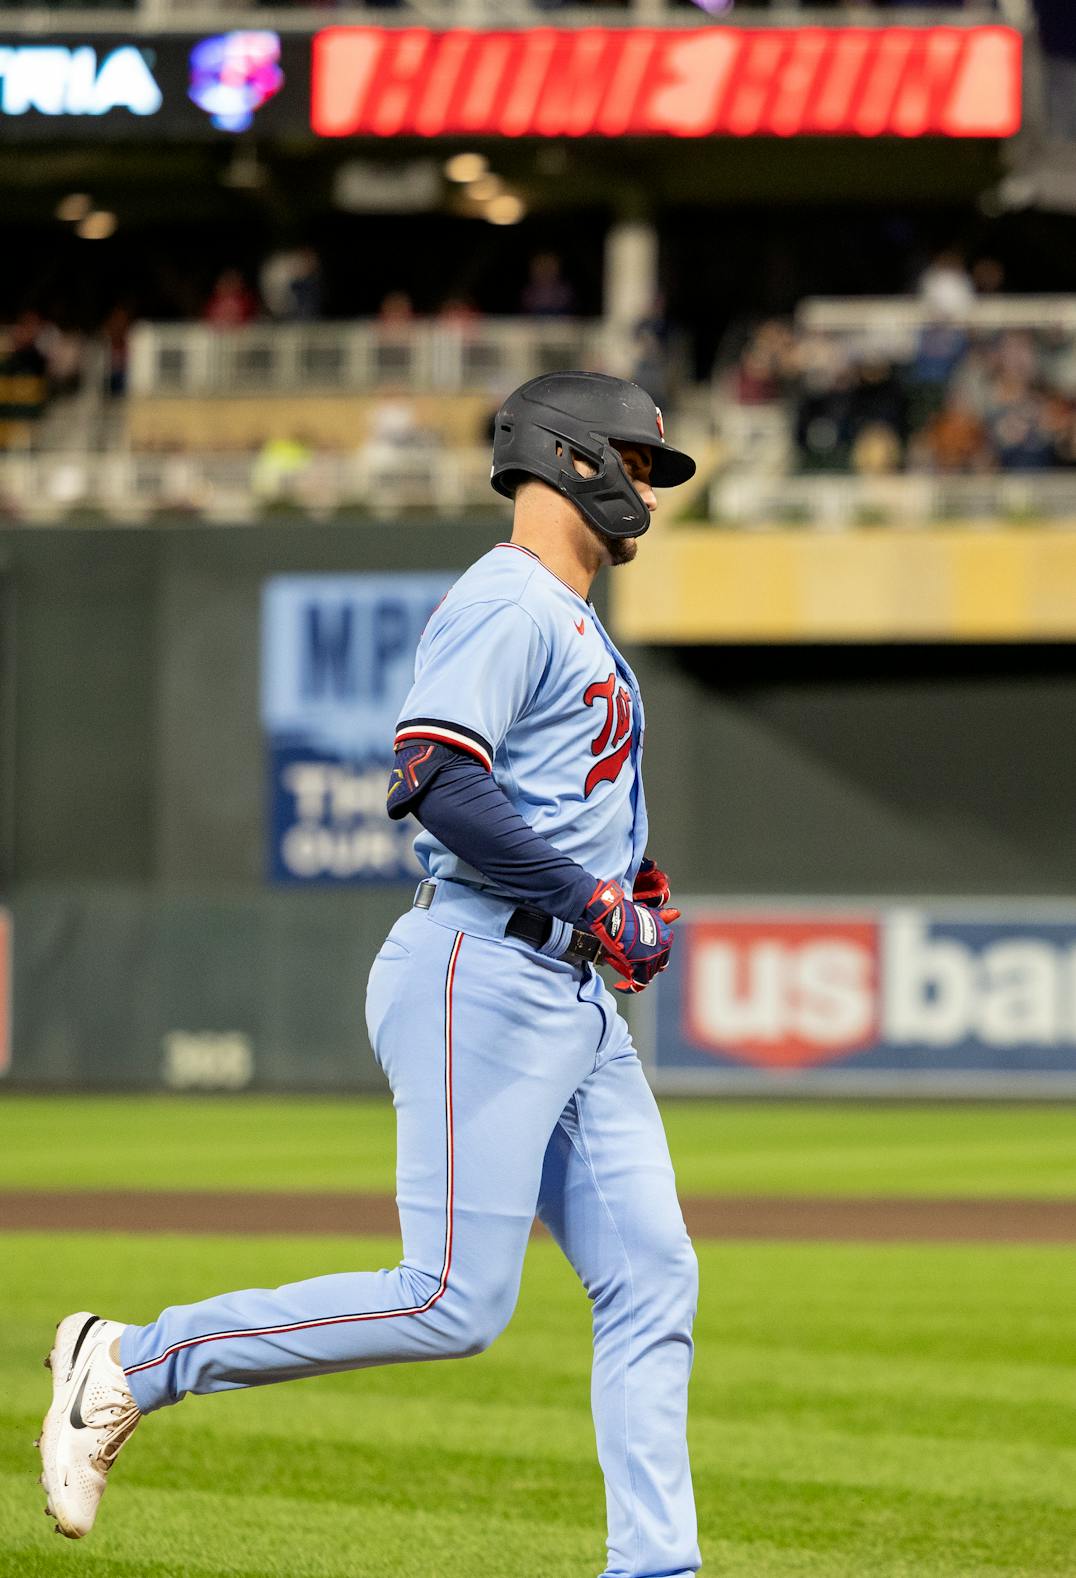 Ryan Jeffers returns to Twins, his home run swing in fine form